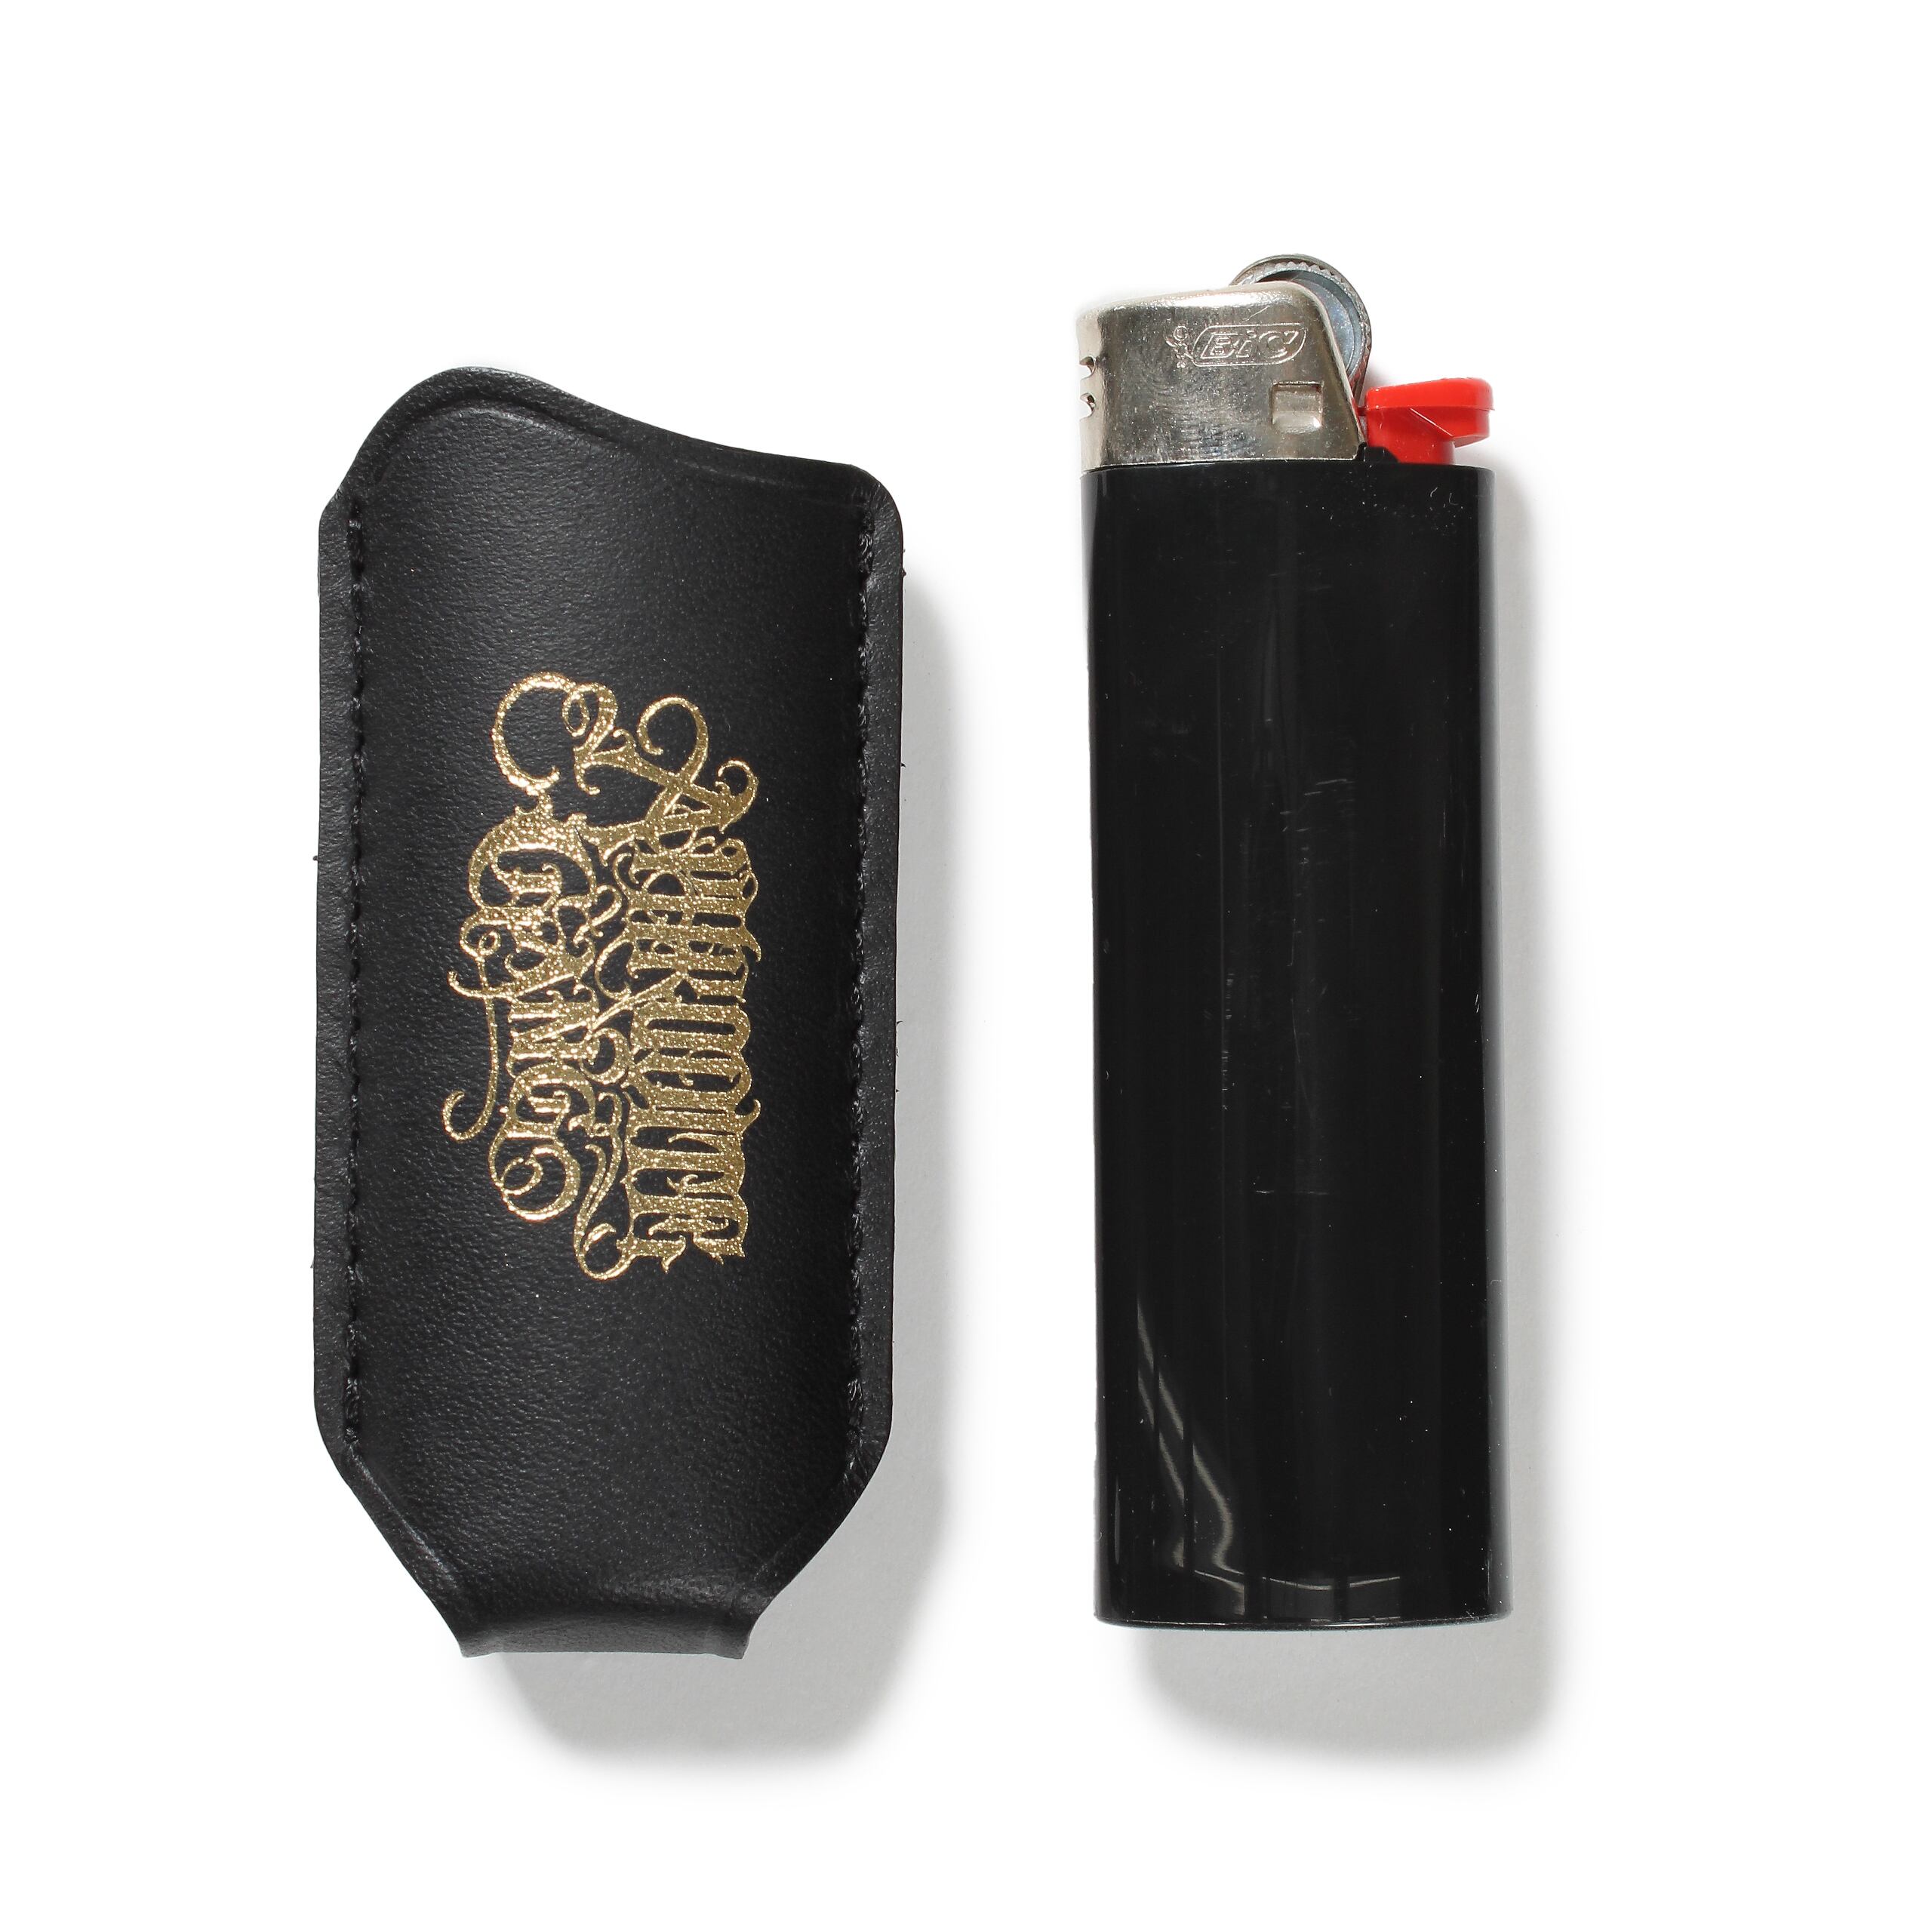 AGH CLASSIC LOGO LEATHER LIGHTER CASE